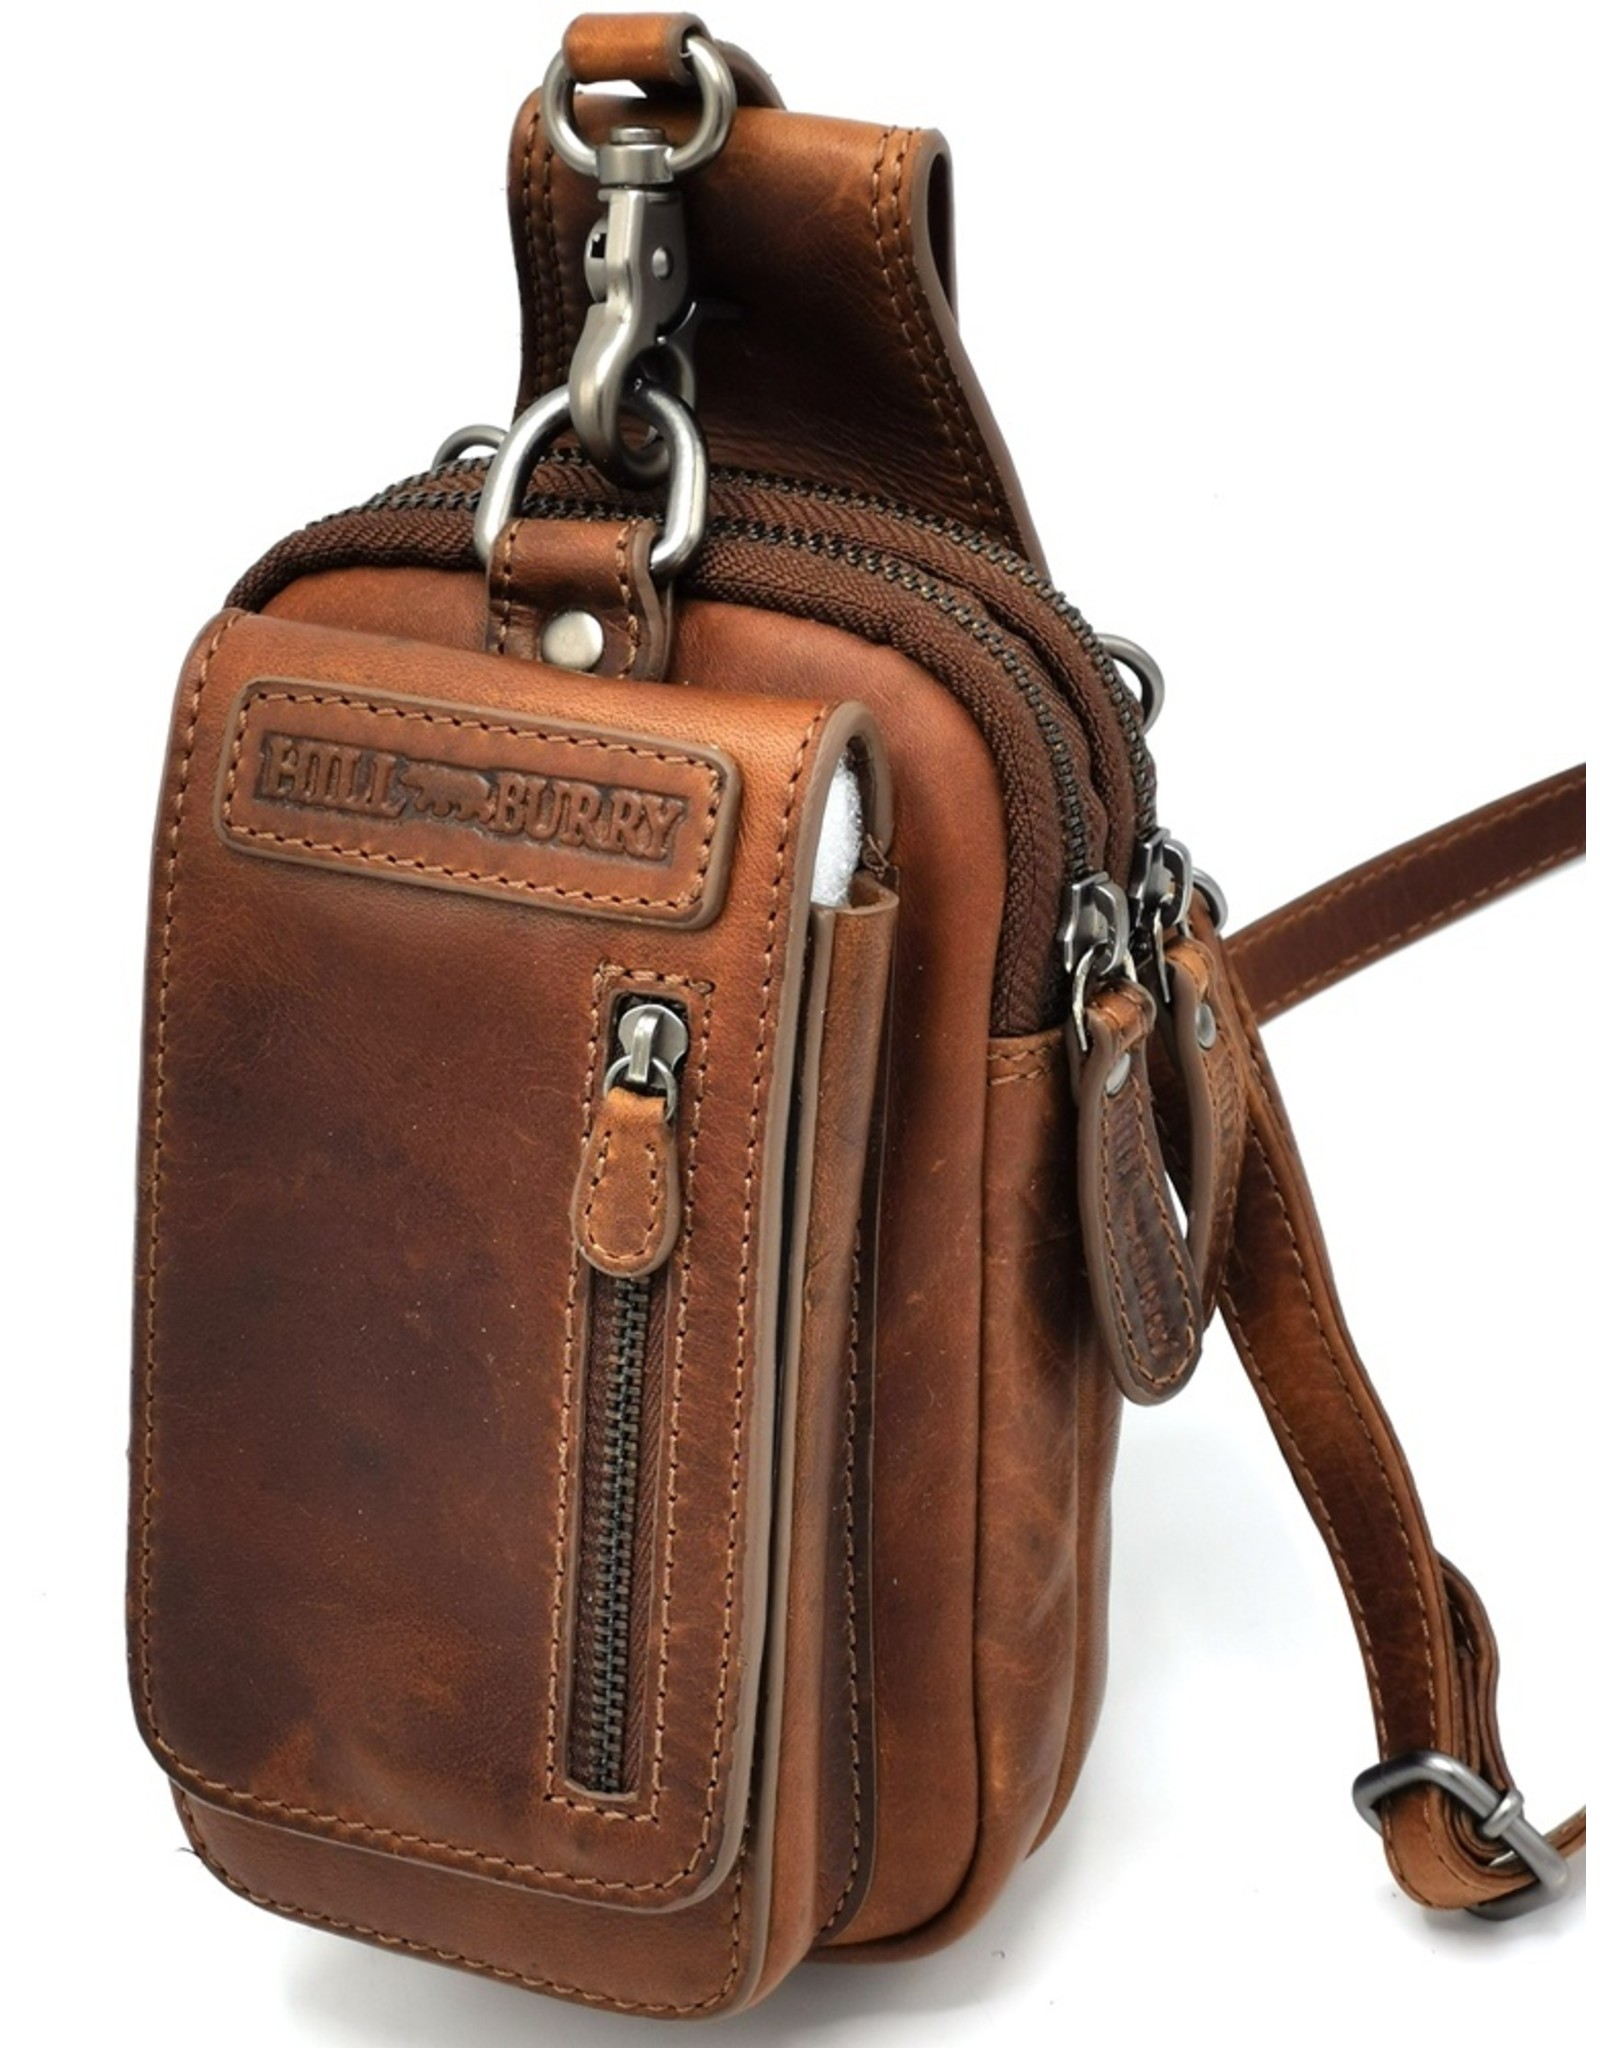 HillBurry Leather bags - HillBurry Leather Belt and Shoulder Bag 2 in 1 Brown